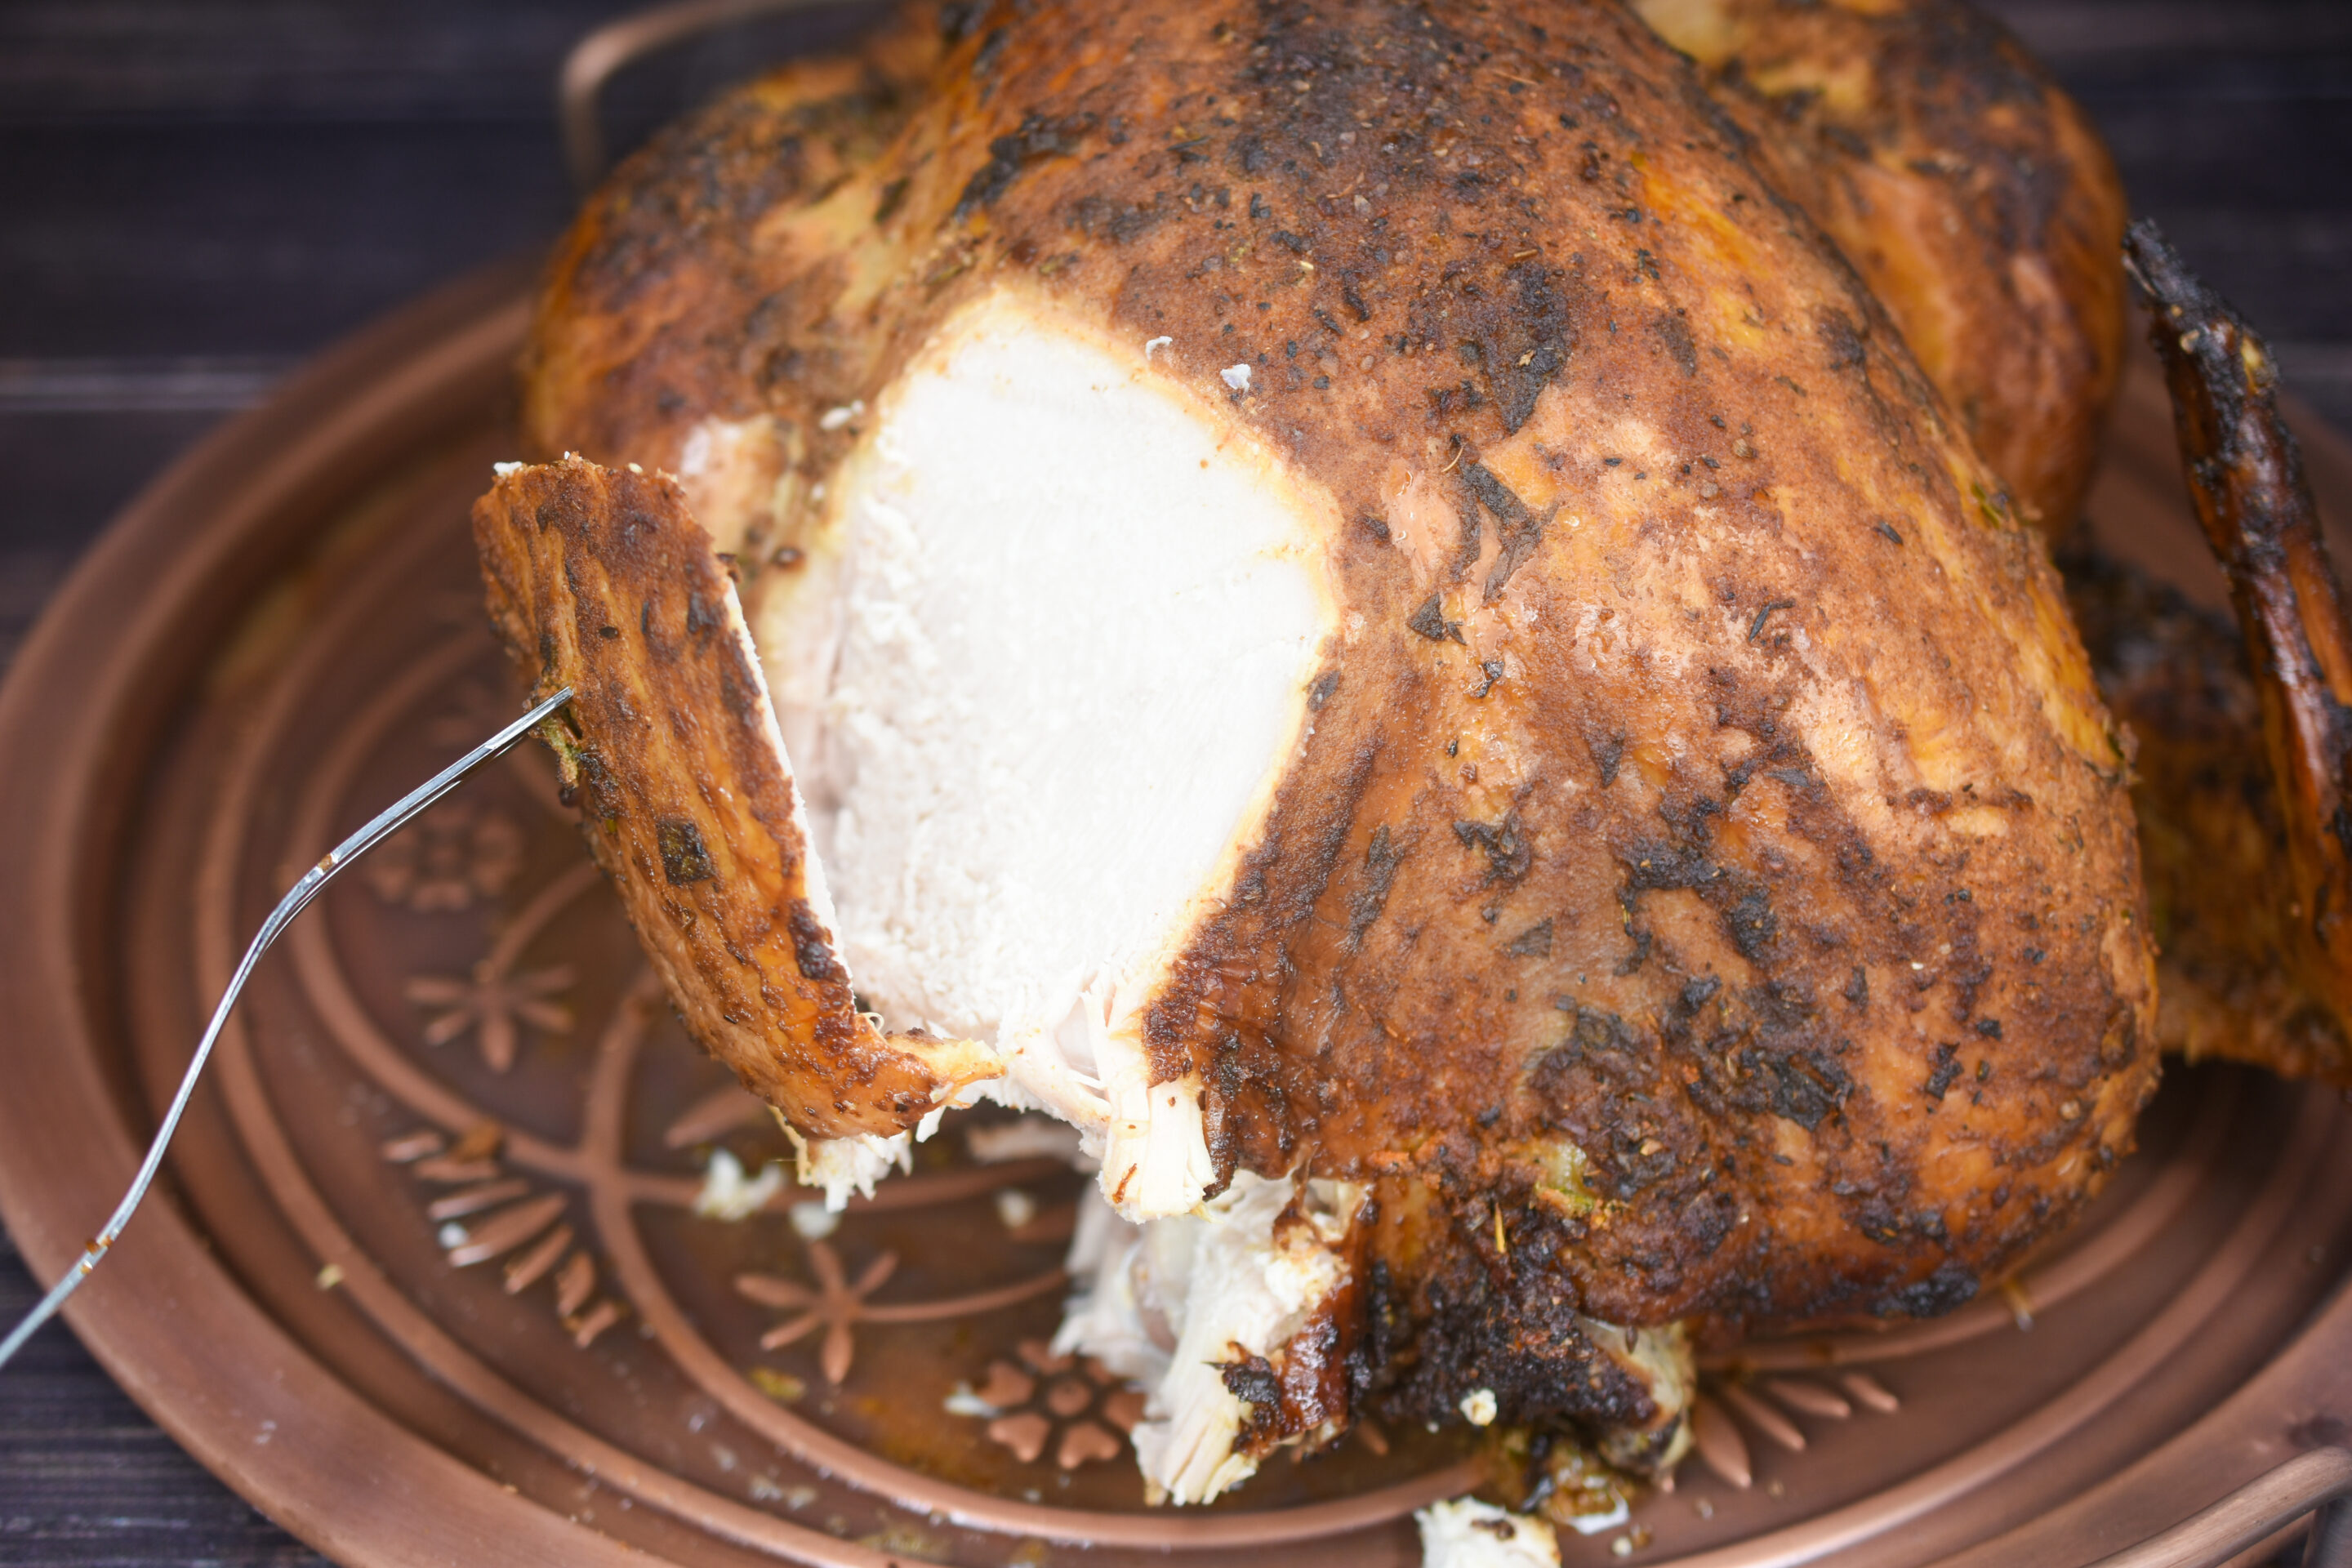 Smoked Turkey Recipe. Smoking a turkey is a delicious change to the typical. How to smoke a turkey.